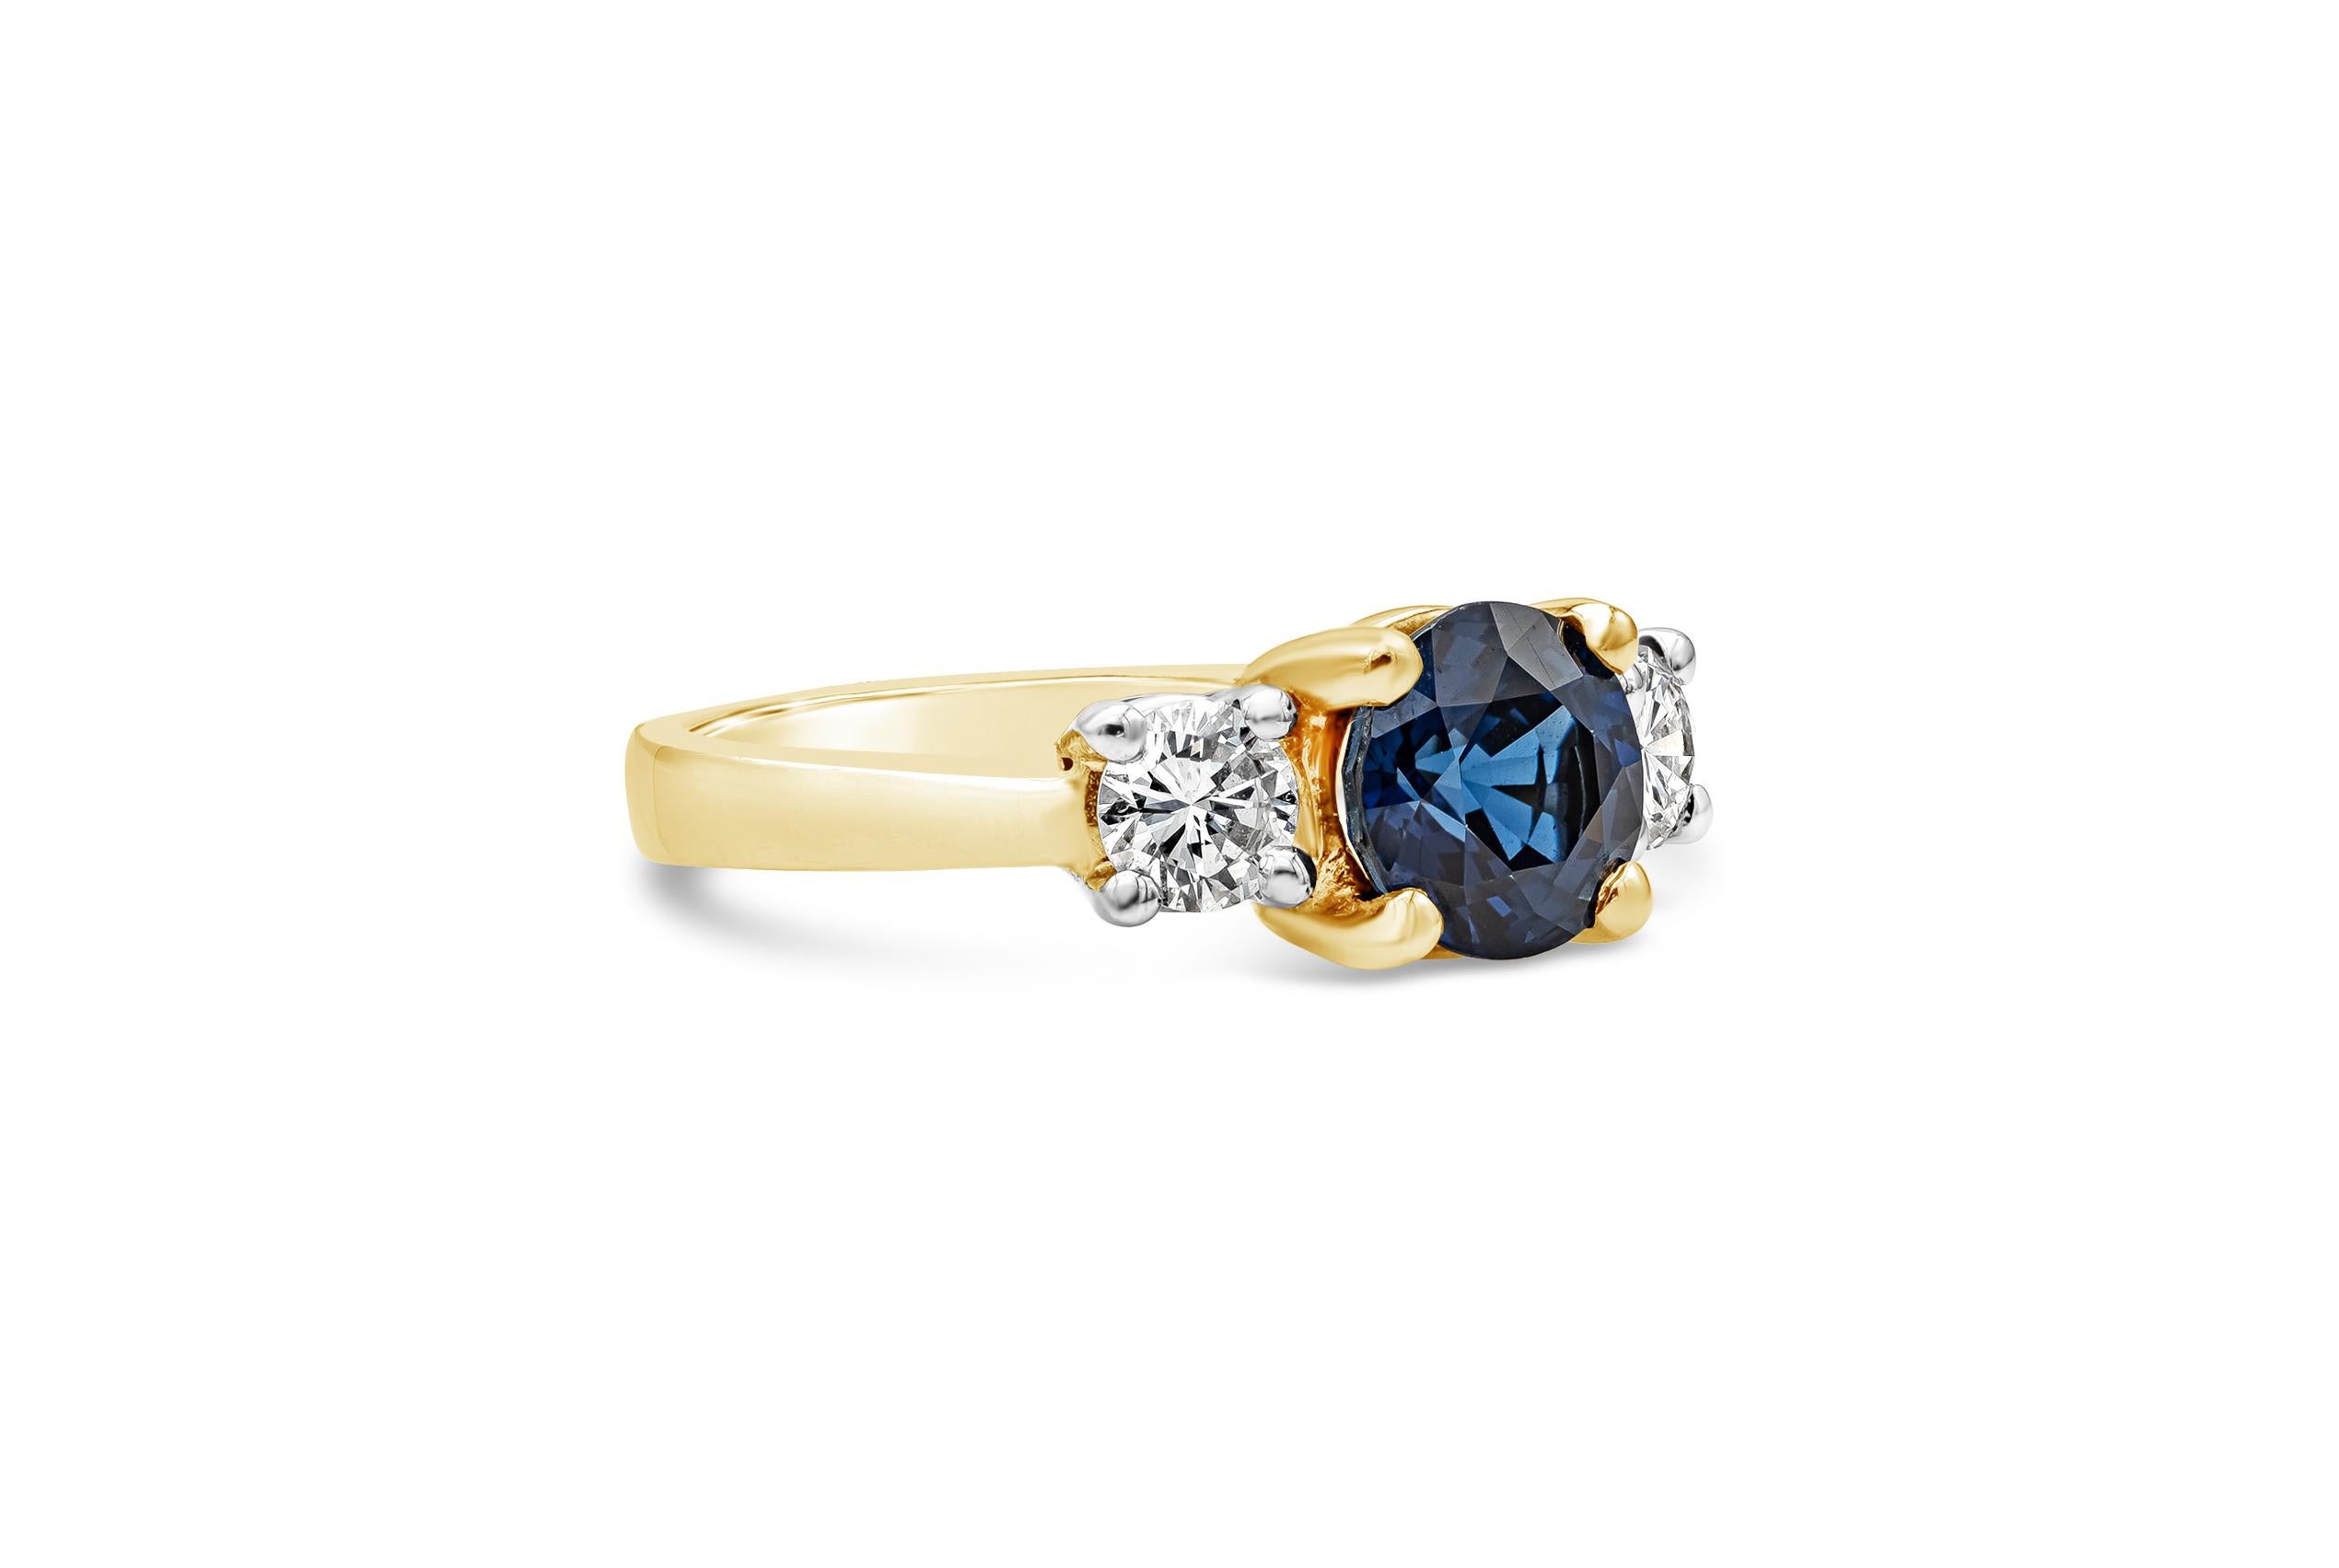 A gorgeous three stone gemstone engagement ring showcasing a round blue sapphire center stone weighing 2.05 carat total, elegantly flanked by a single round cut diamond on each side weighing 0.60 carats total, set in a timeless four prong setting